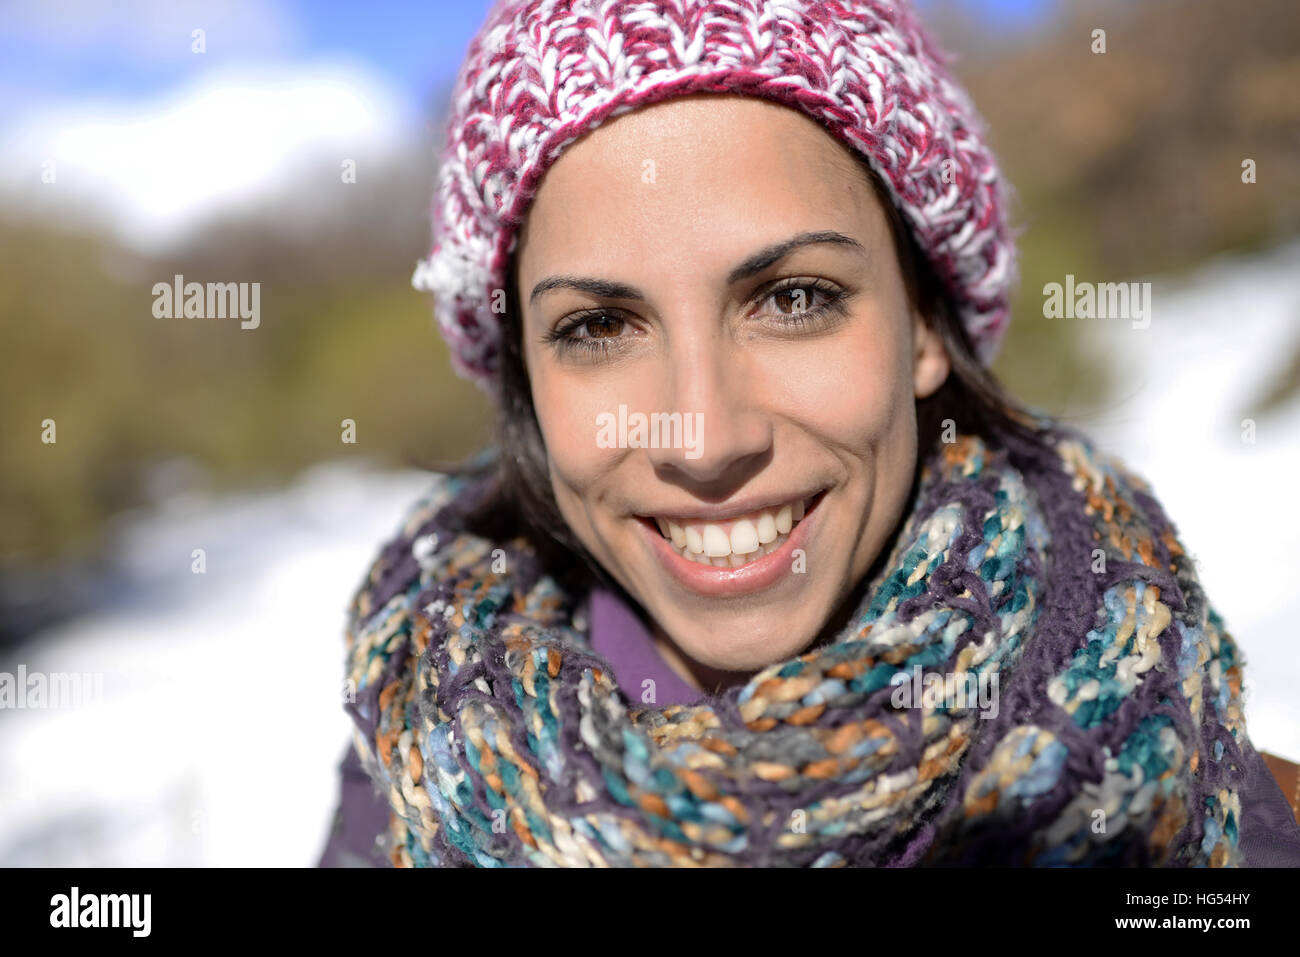 Attractive young woman in winter environment Stock Photo